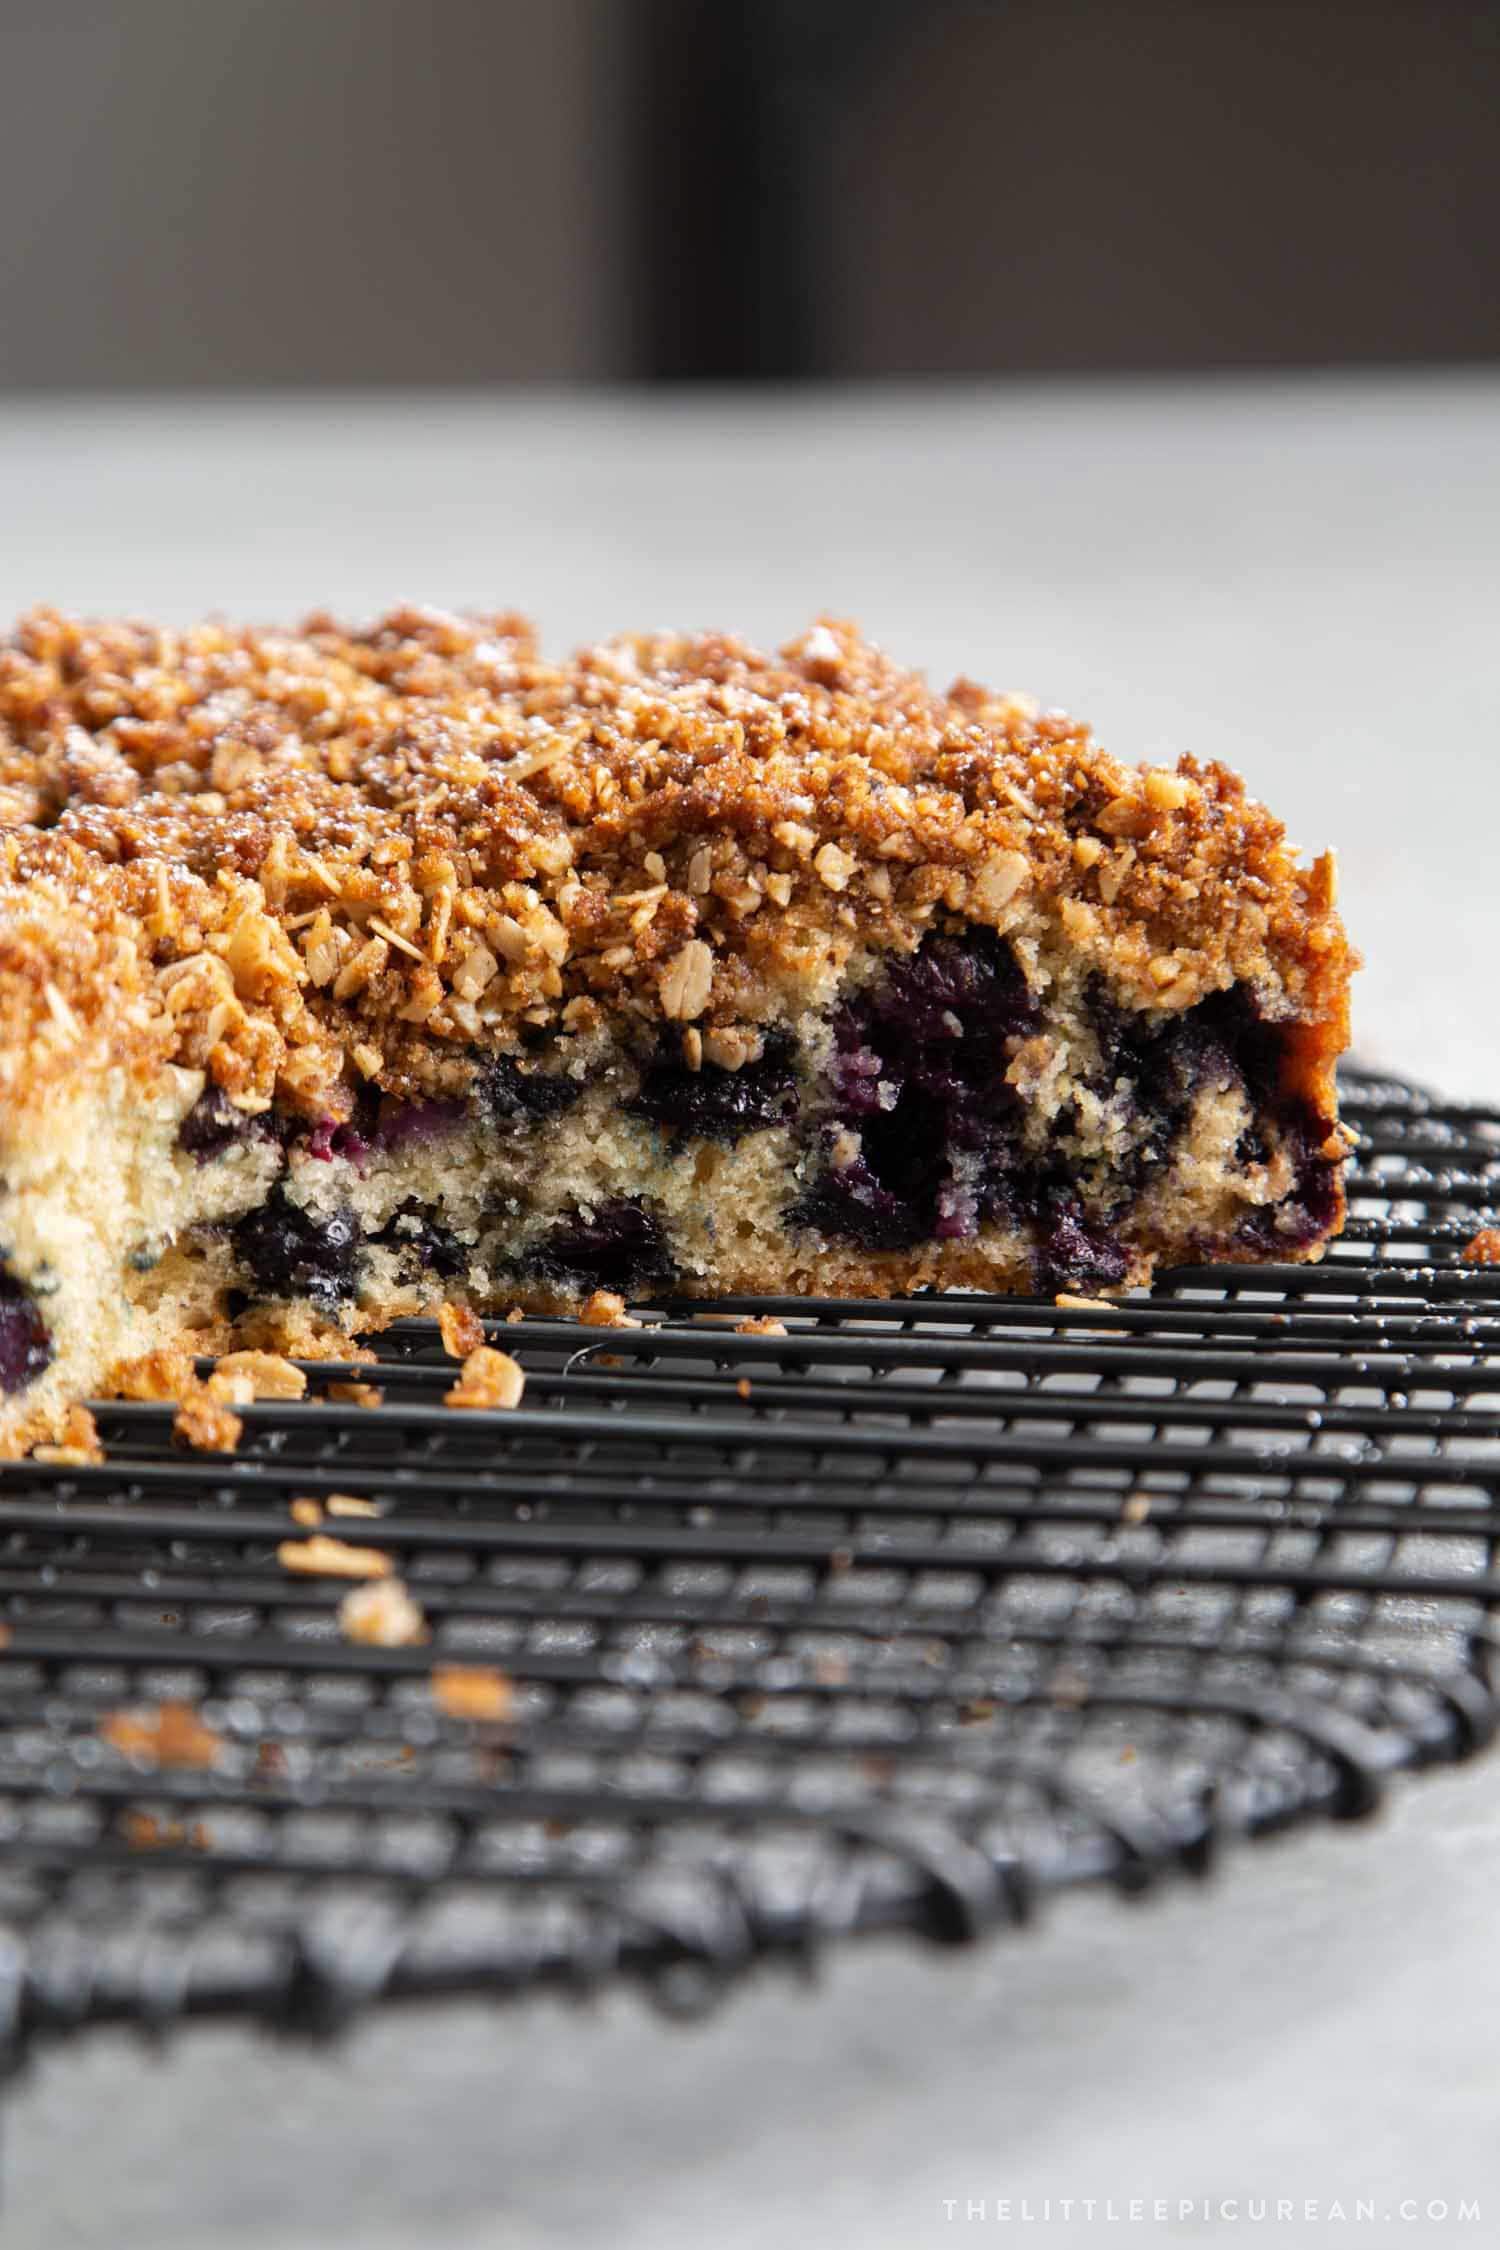 Blueberry Walnut Streusel Cake made with fresh blueberries topped with oat-walnut mixture